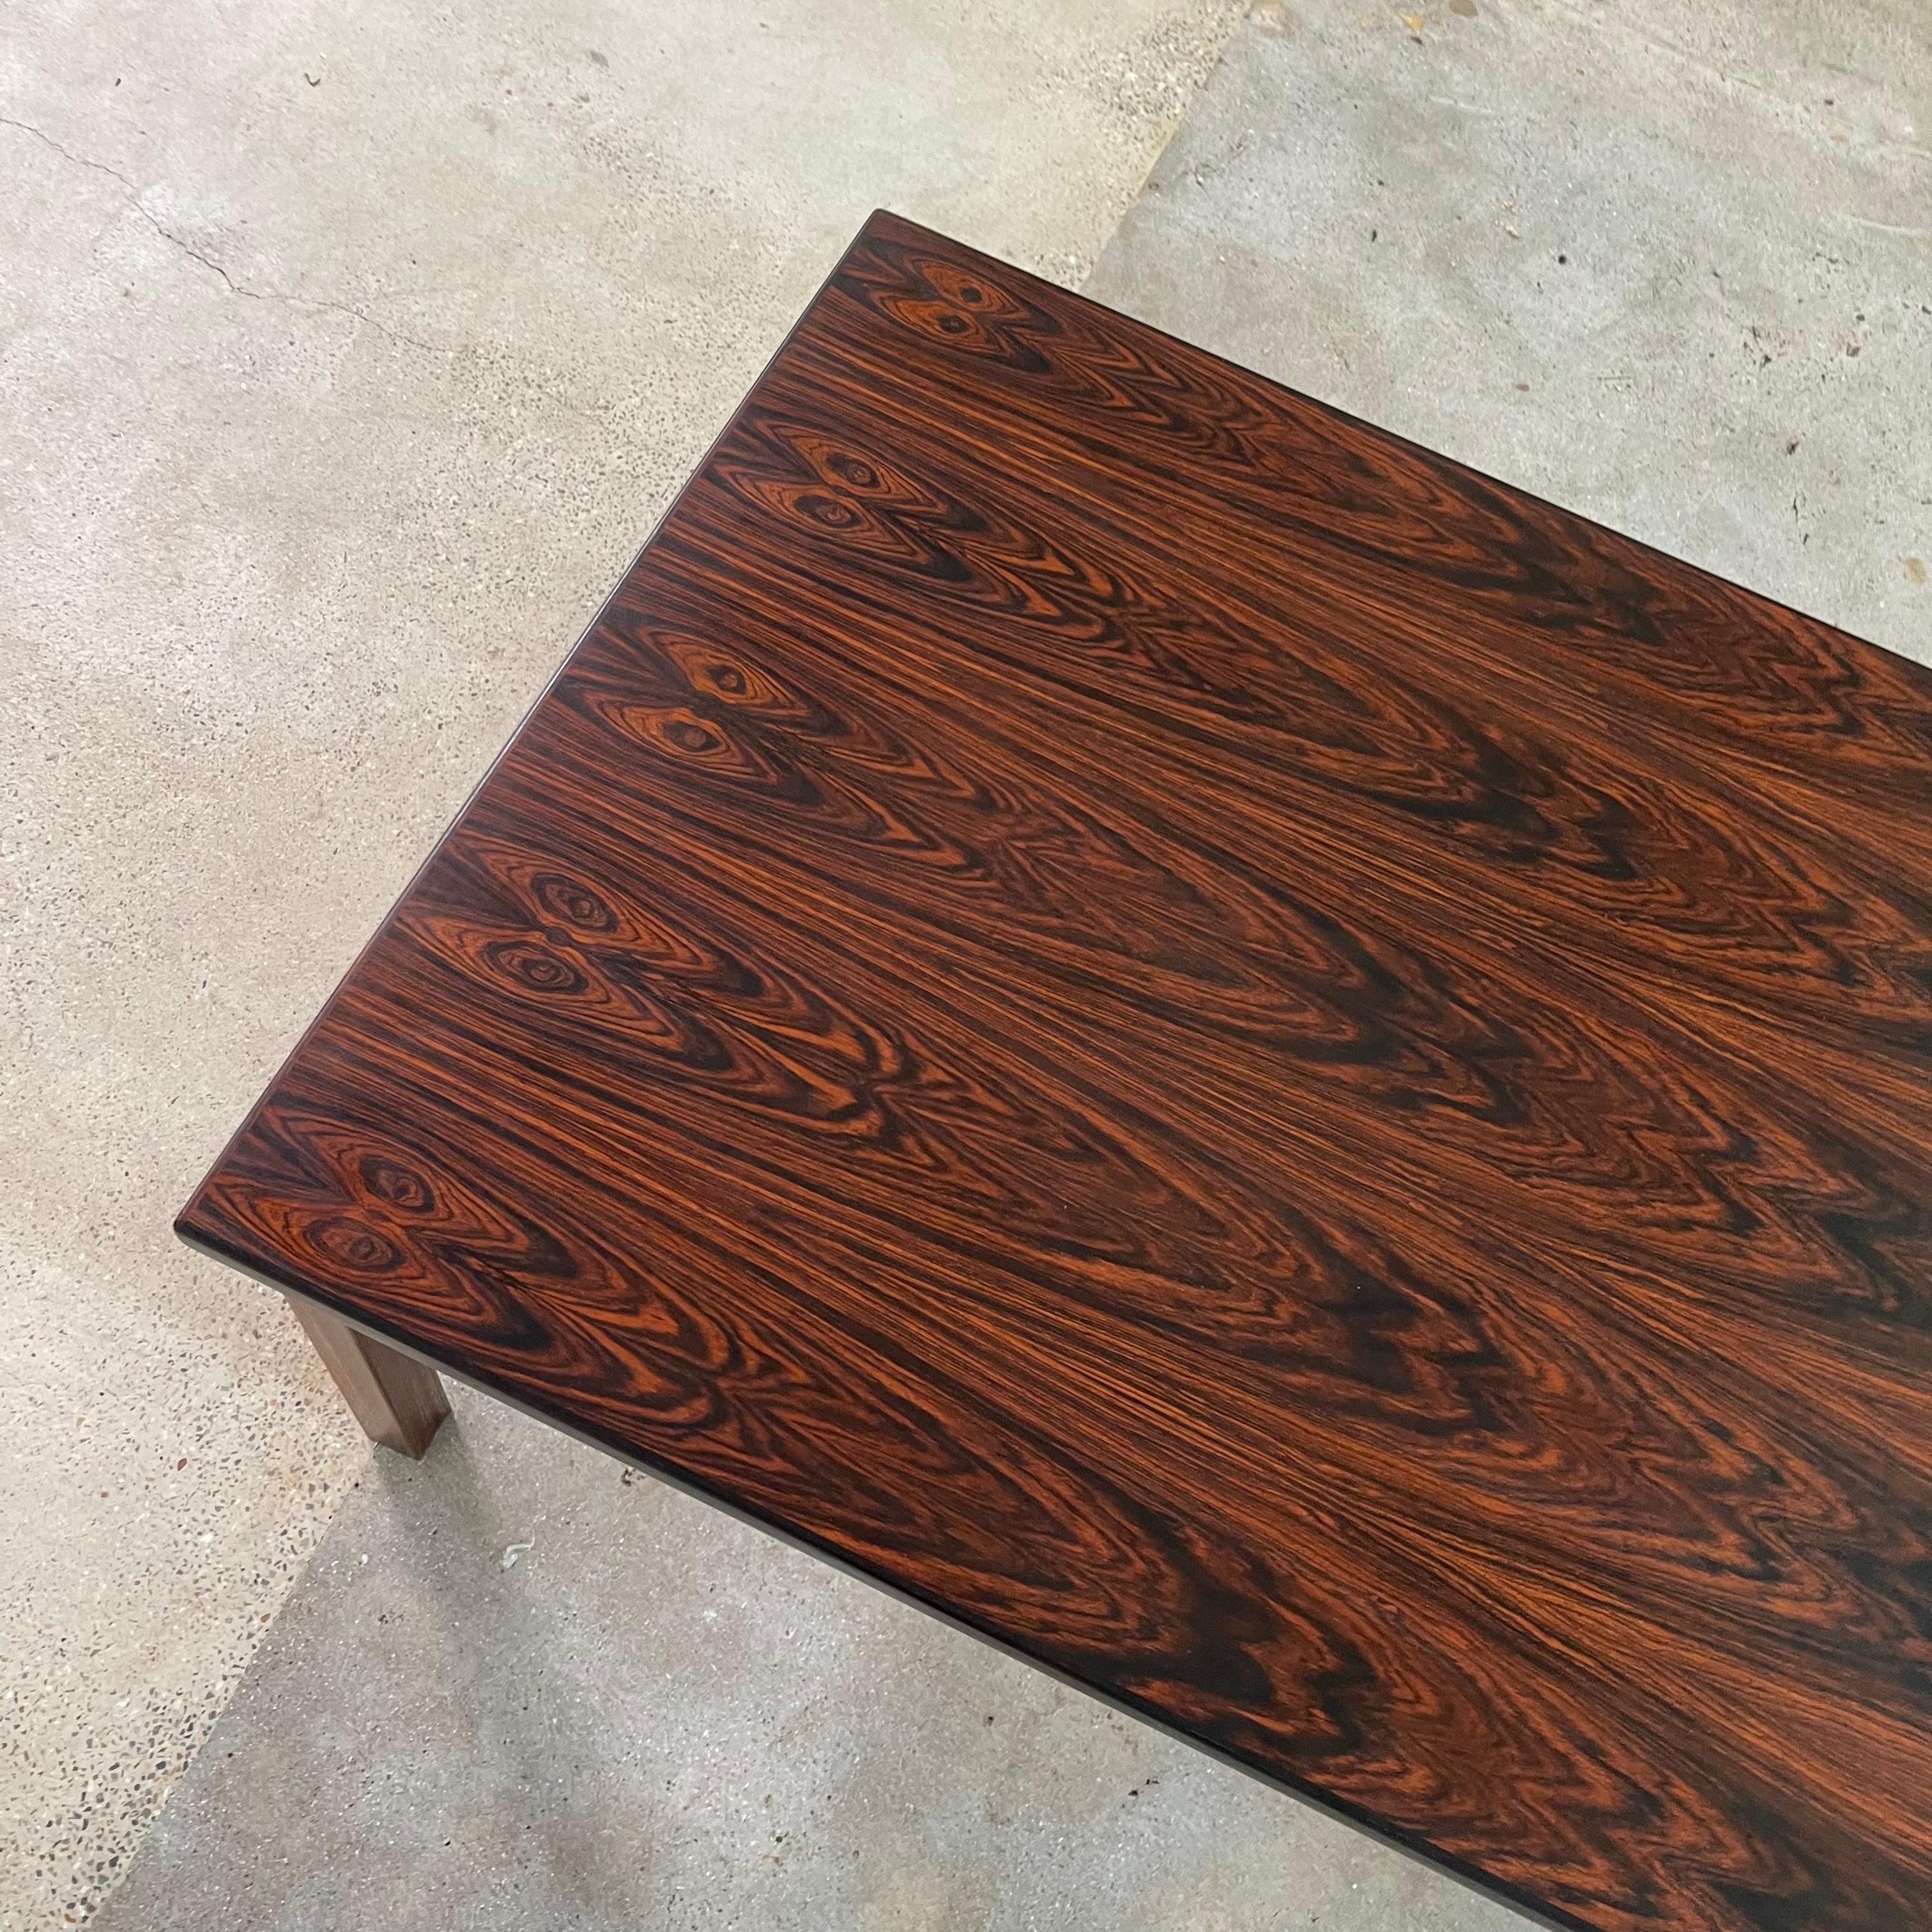 Danish Mid-Century Modern coffee table in rosewood. Very elegant and Classic design with striking wood grains and clean lines. This piece of rosewood is bursting with movement and the simple design allows for the raw materials to shine.